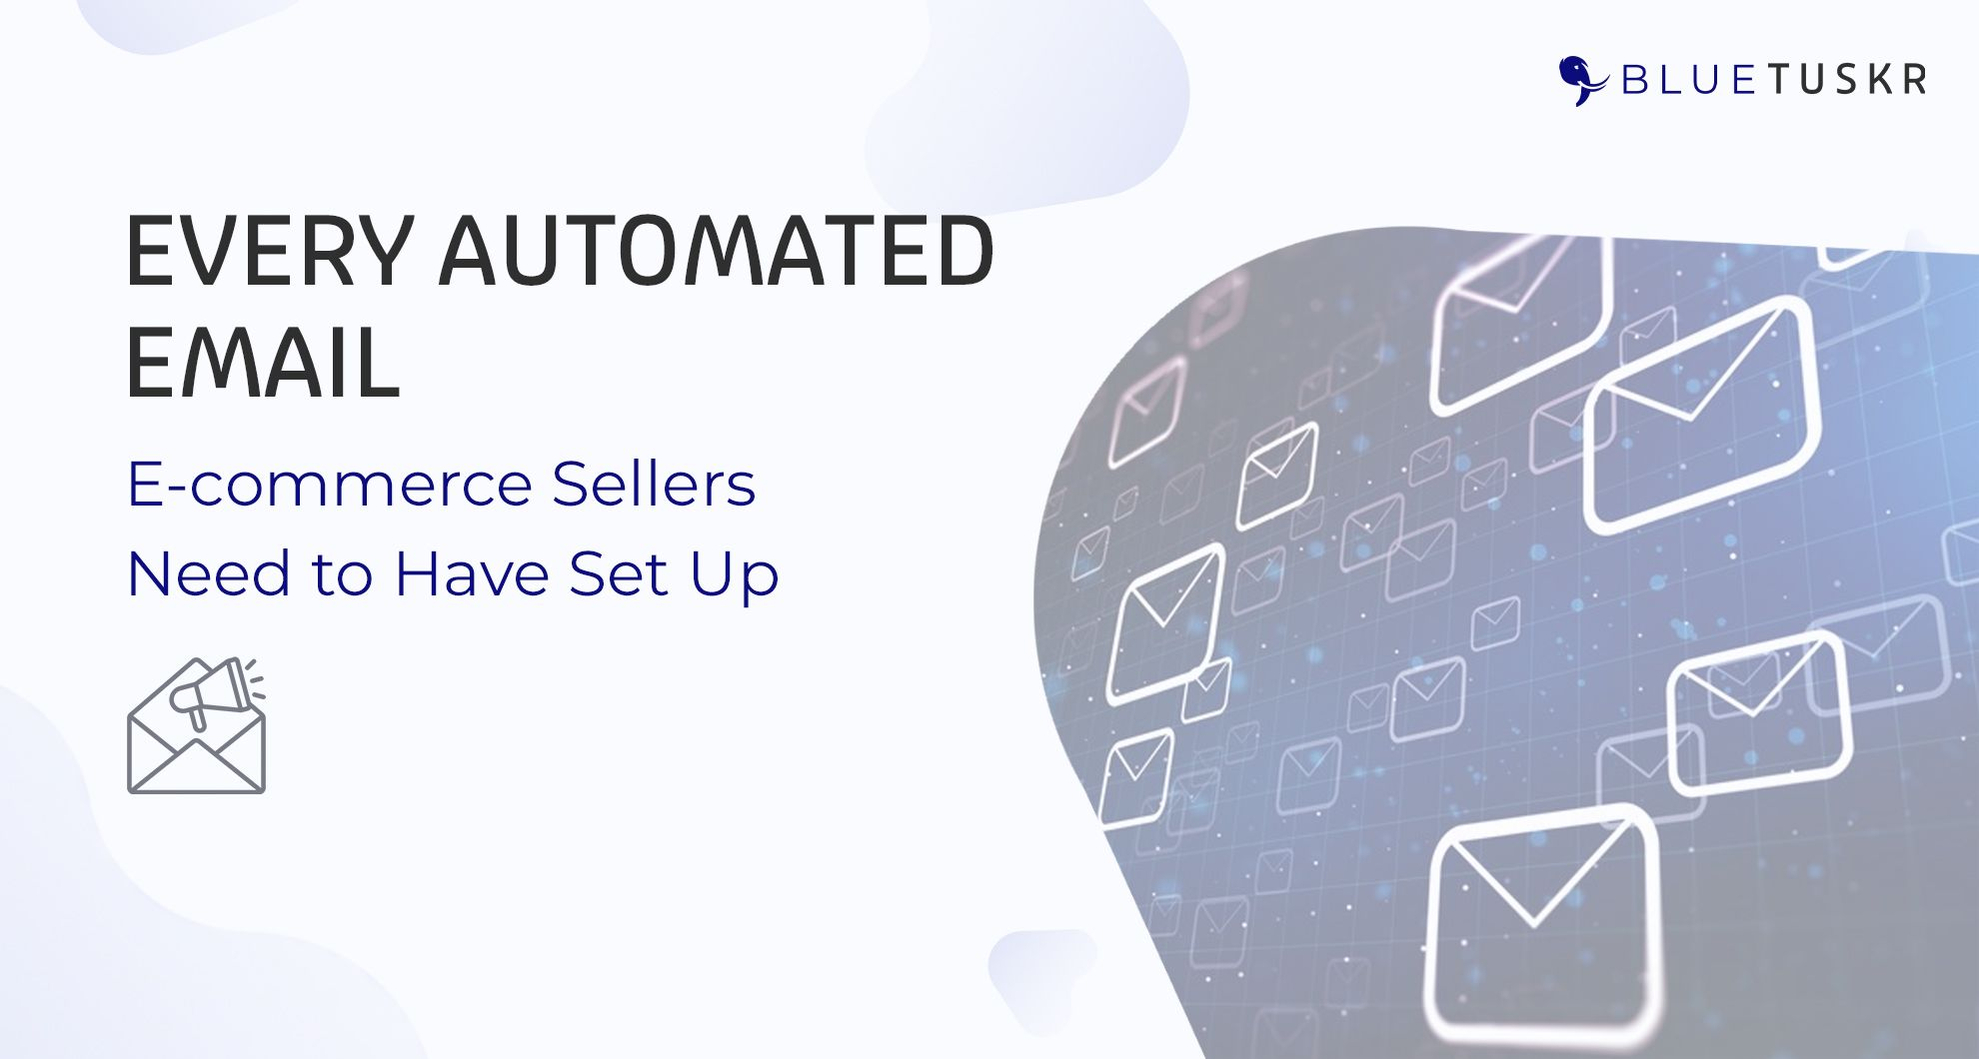 Every Automated Email E-commerce Sellers Need to Have Set Up